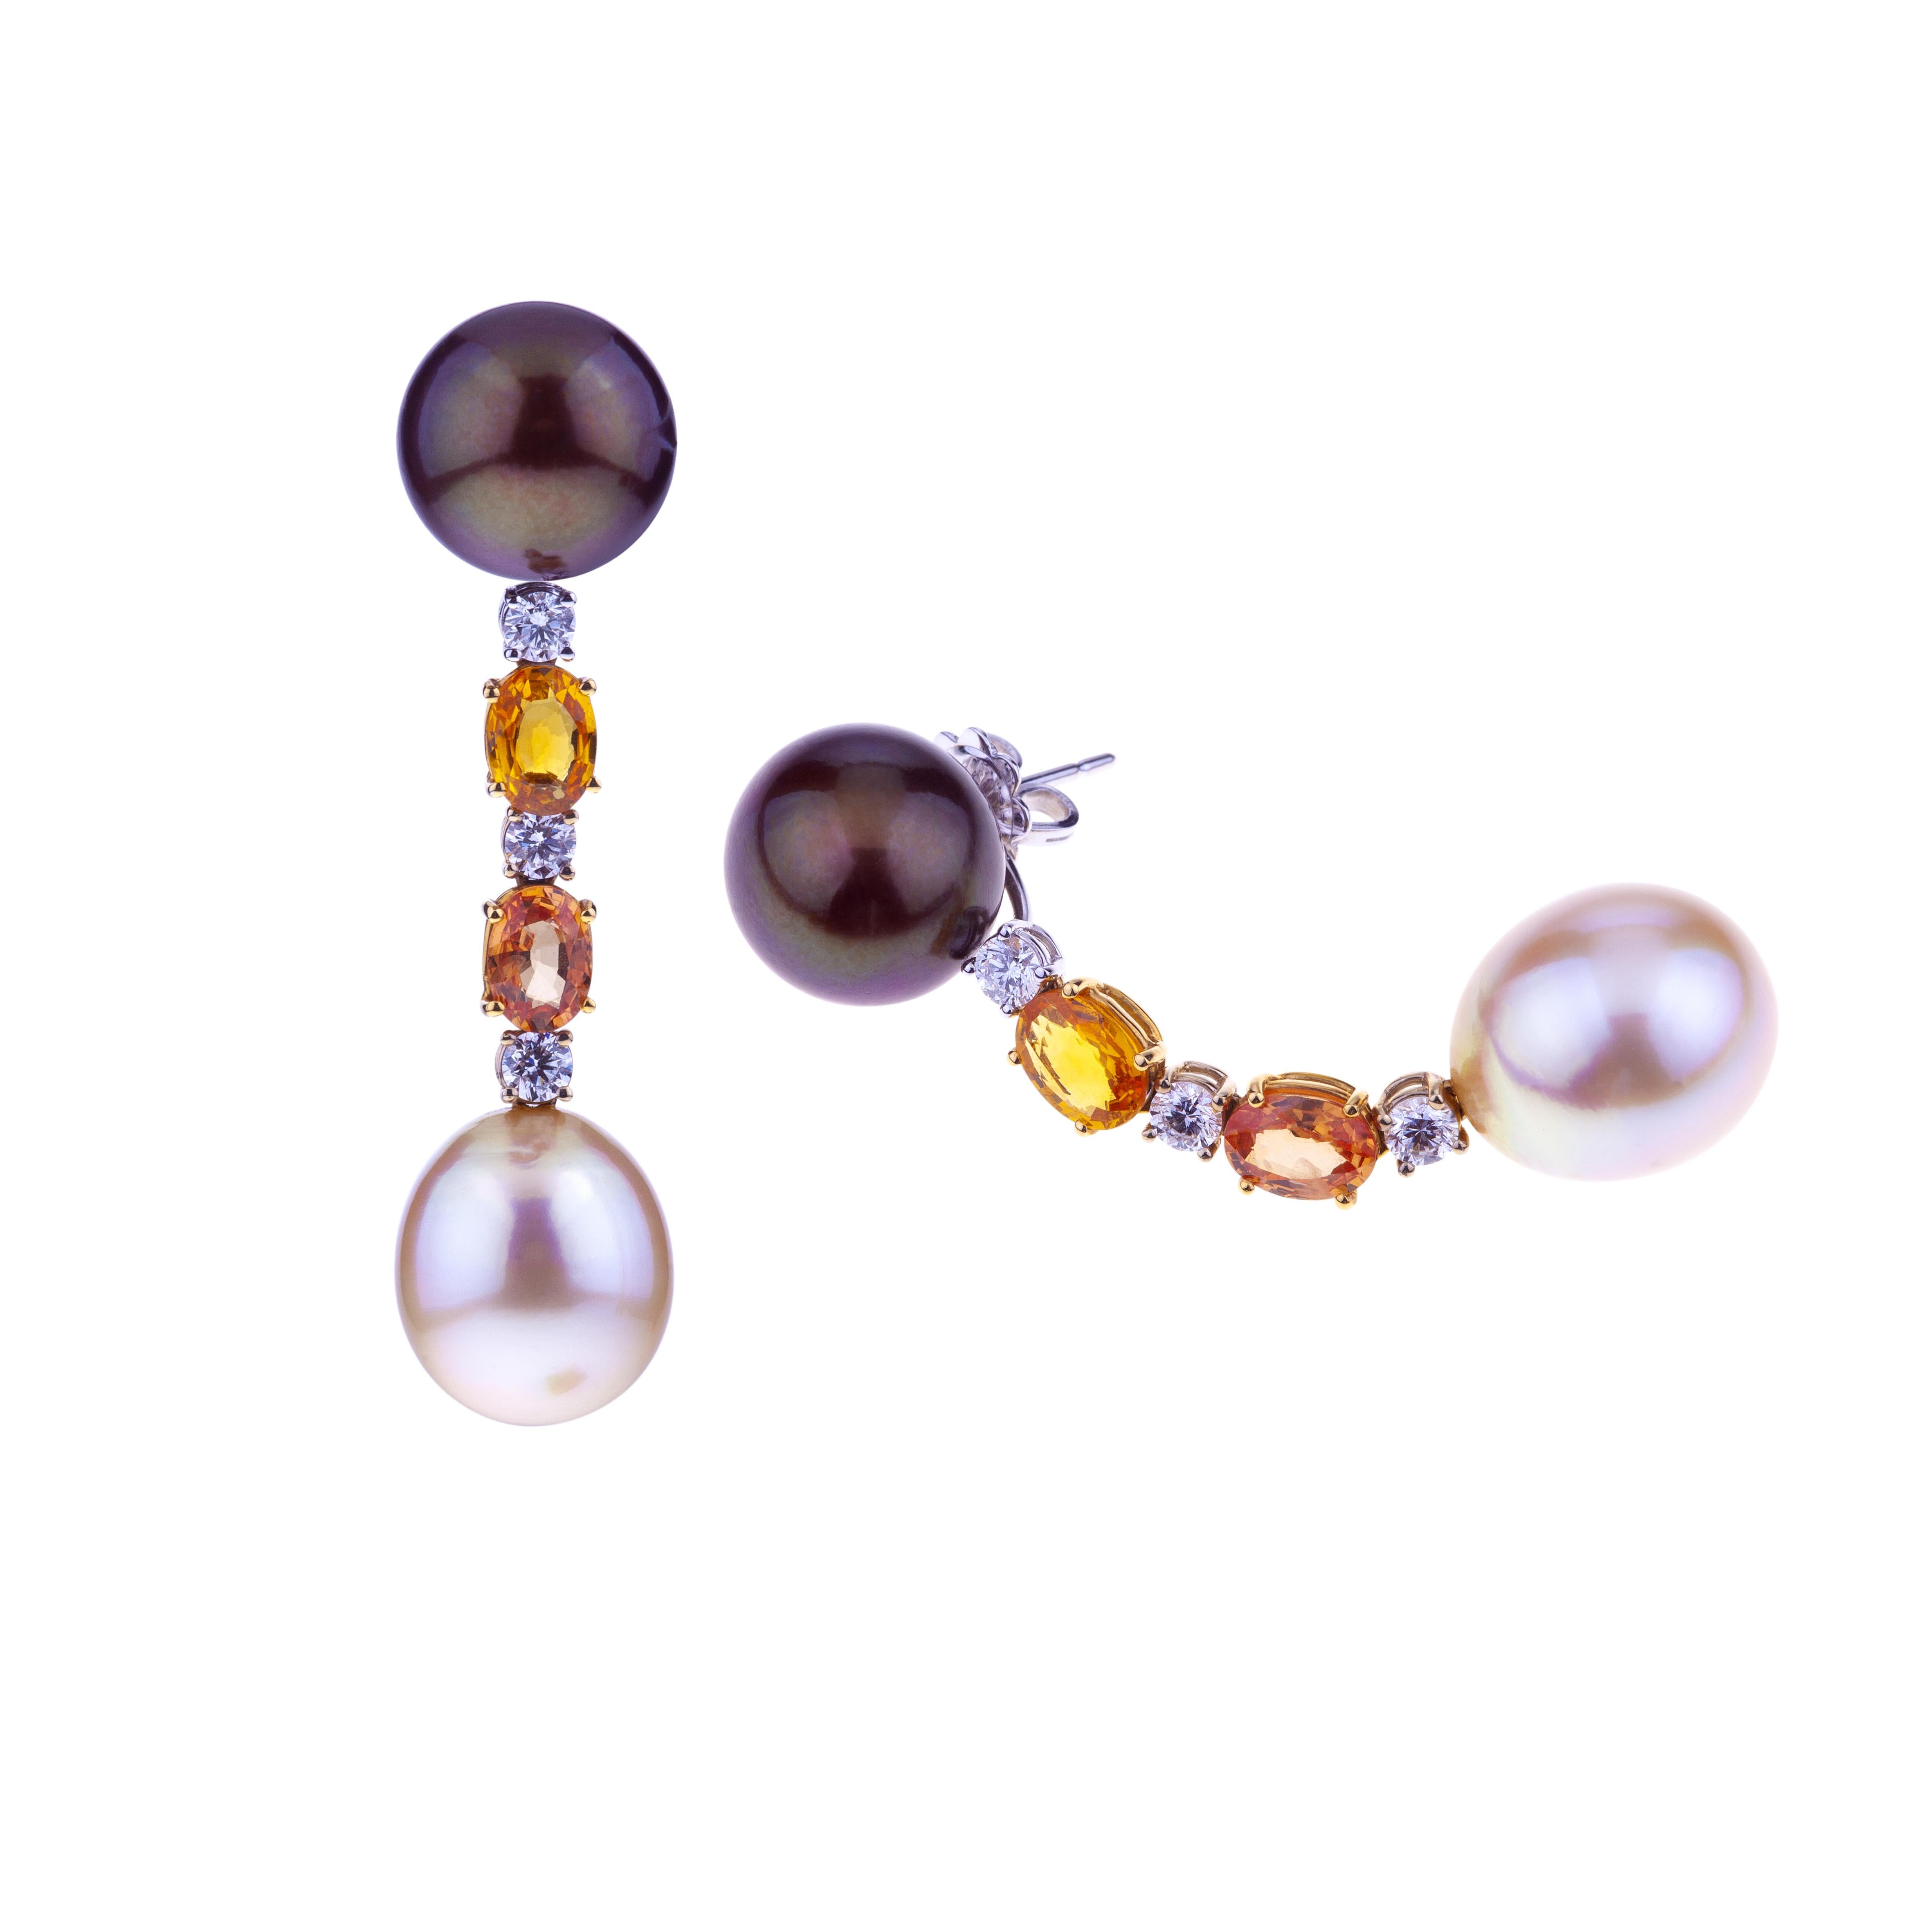 Earrings with Gold and Chocolate Pearls mm.13 and Diamonds.
Long Pendant Earrings with Exceptional Pearls in Chocolate and Gold Variety size mm.13. 
The Stripes are with diamonds ct. 0.85 and Yellow sapphires ct. 3.90.
Angeletti Boasts an